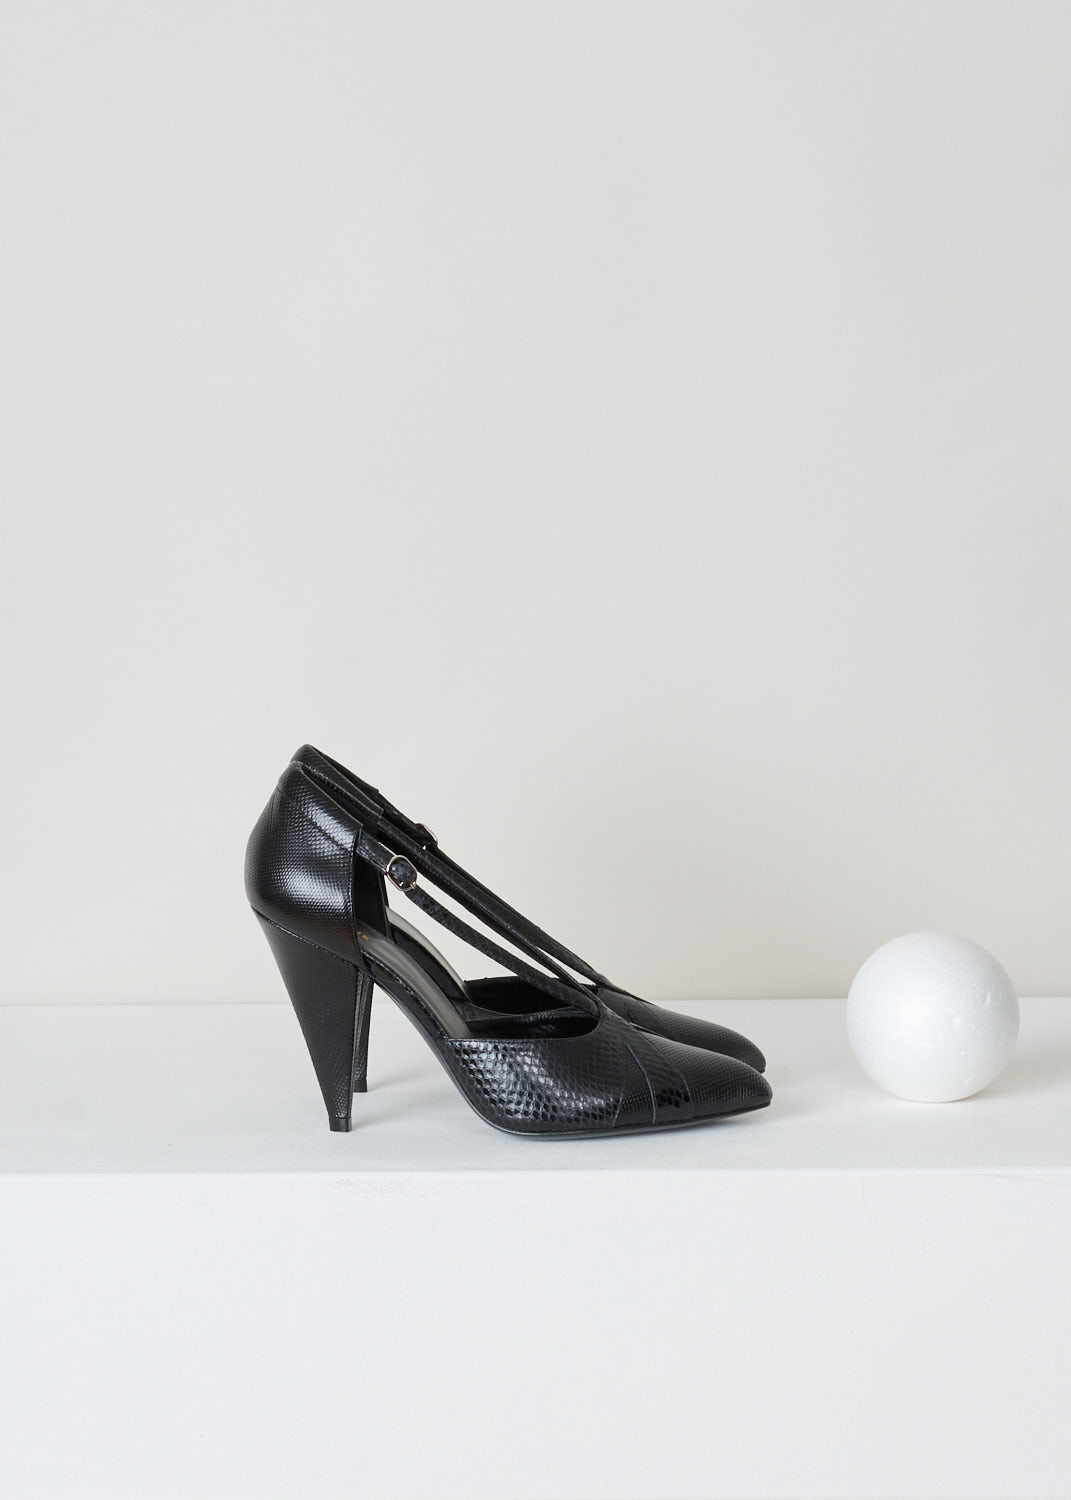 Celine, Decussate-strap triangle heel pumps, 332934096C_38NO_criss_cross_pump, black, side, Black leather embossed with a snakeskin pattern, featuring a crisscross strap which lead up from pointed toe section to the heel. Designed with a triangular shaped heel and has a silver-tone buckle as your fastening option. 

Heel height: 10 cm / 3.9 inch. 